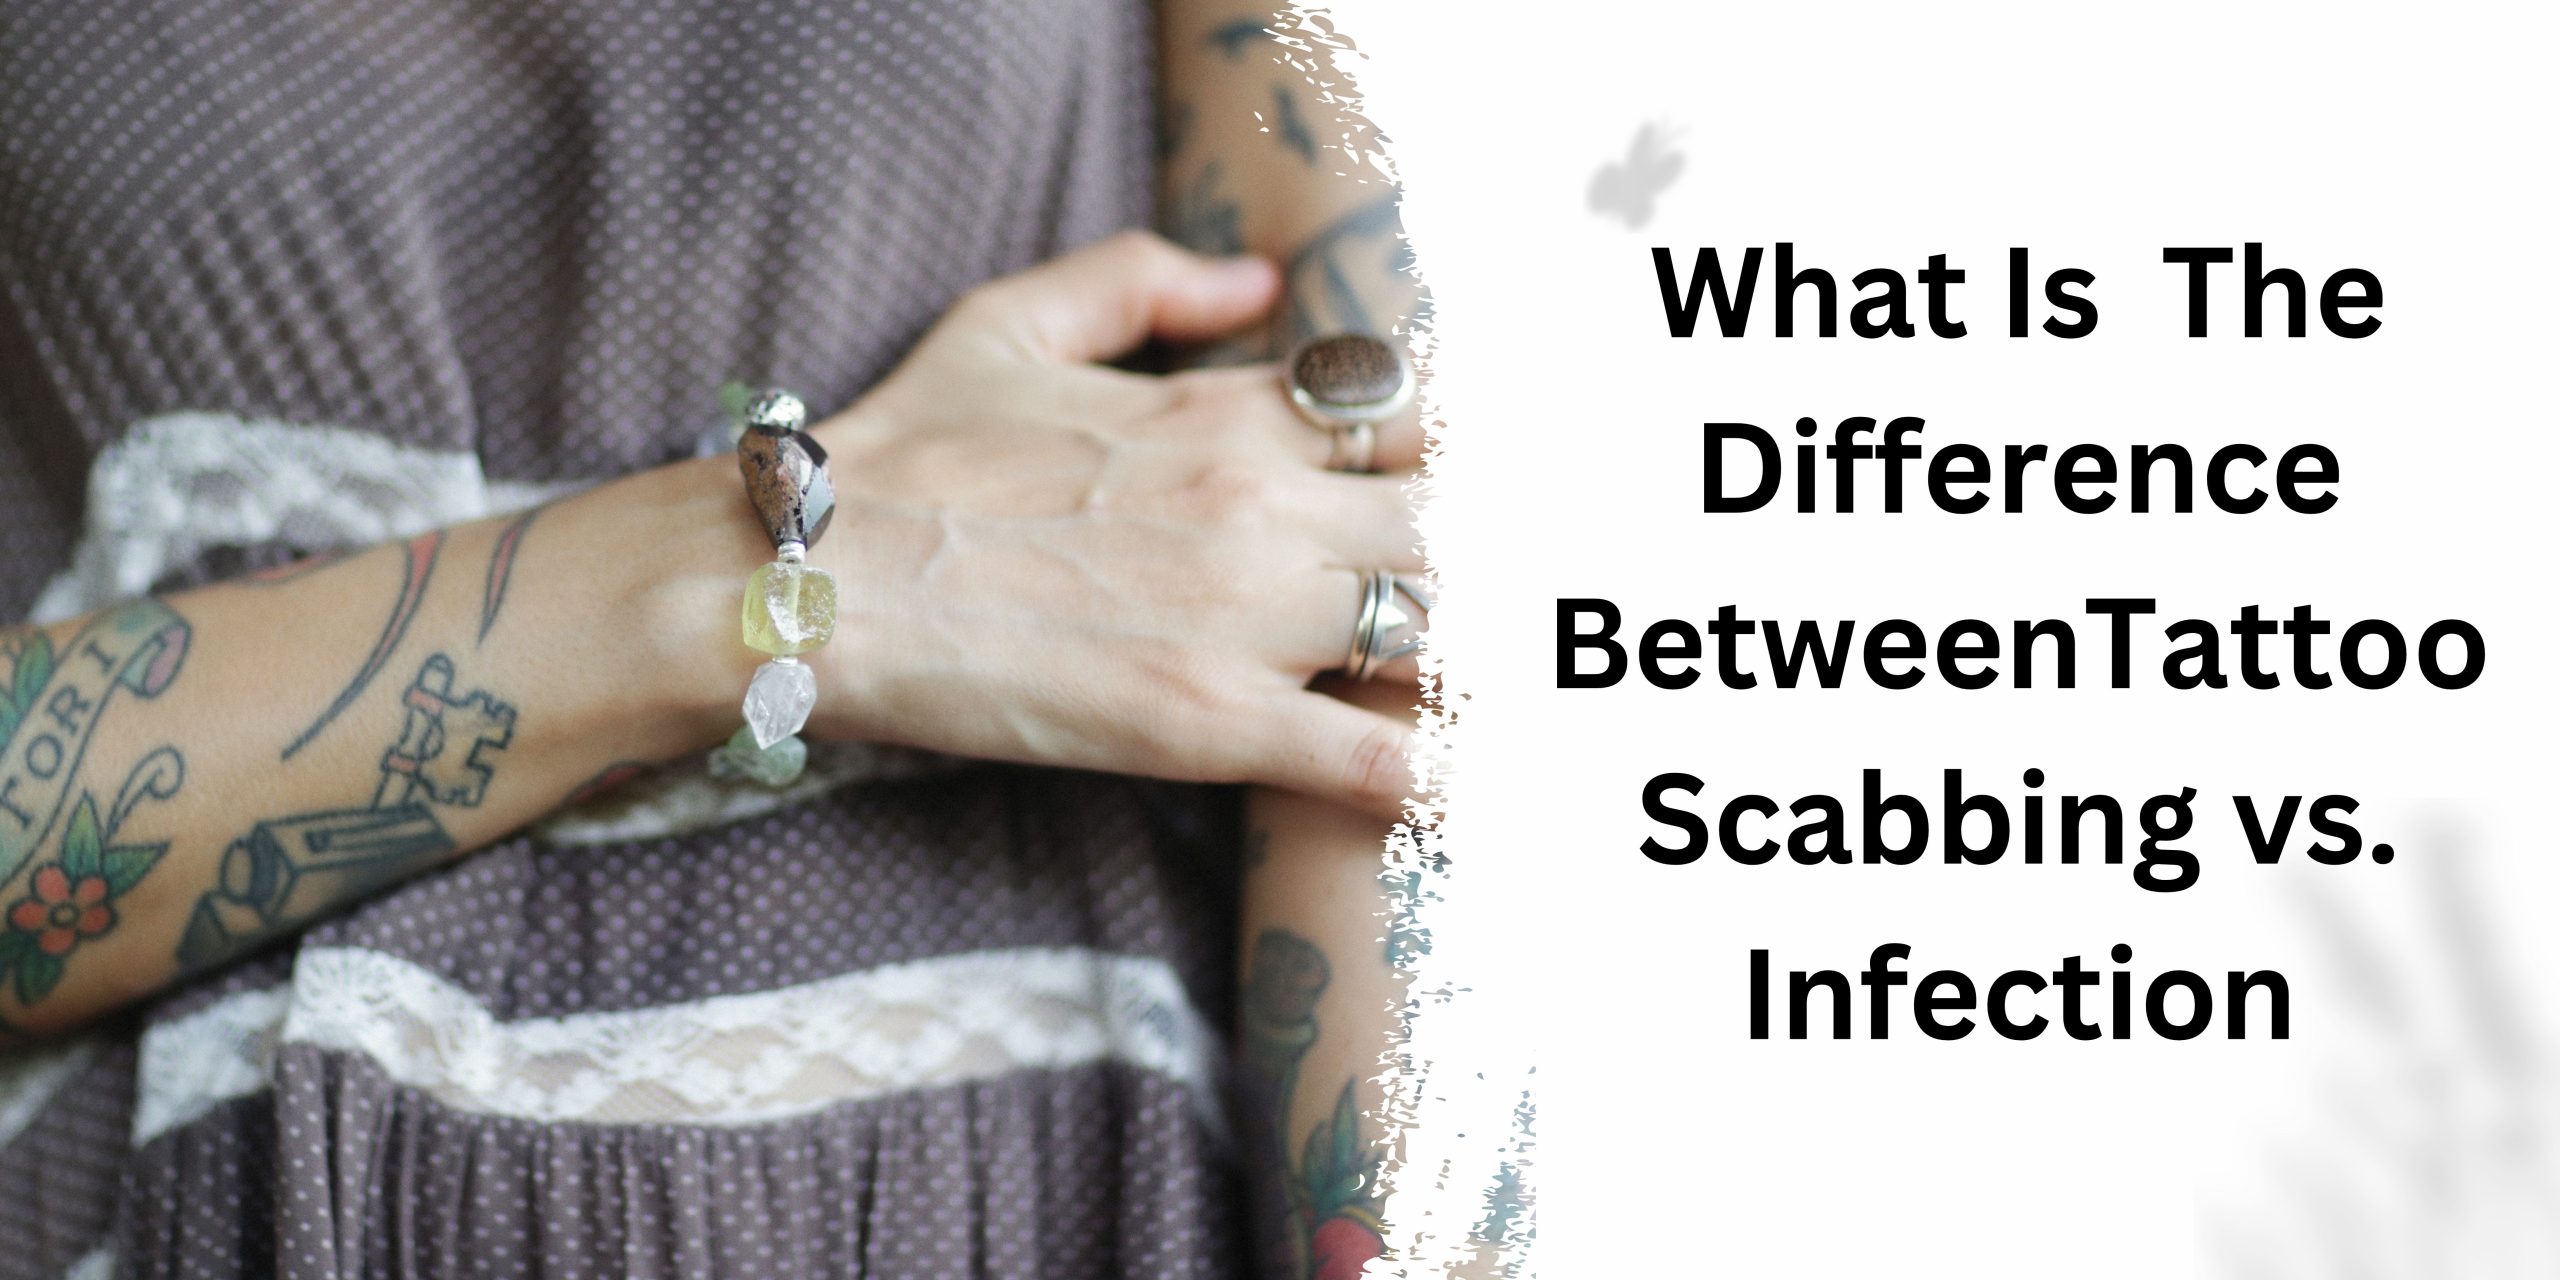 Tattoo Scabbing vs Infection